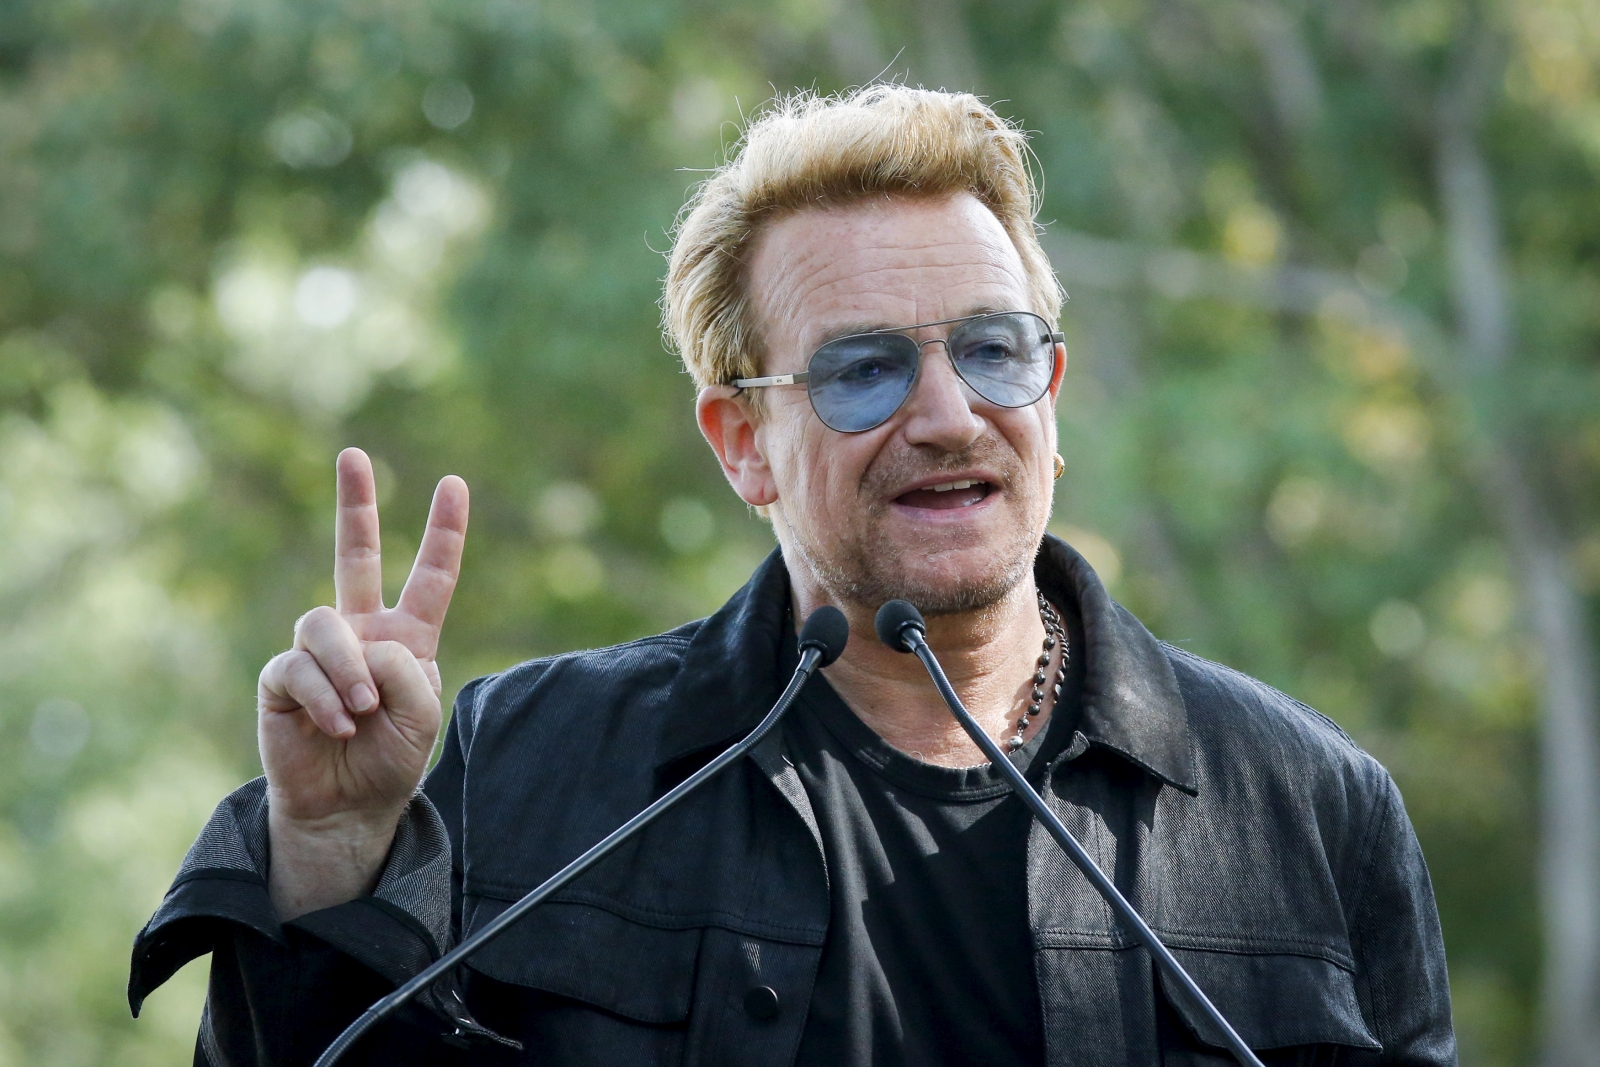 U2's Bono now world's richest rock star after raking in £1bn from Facebook